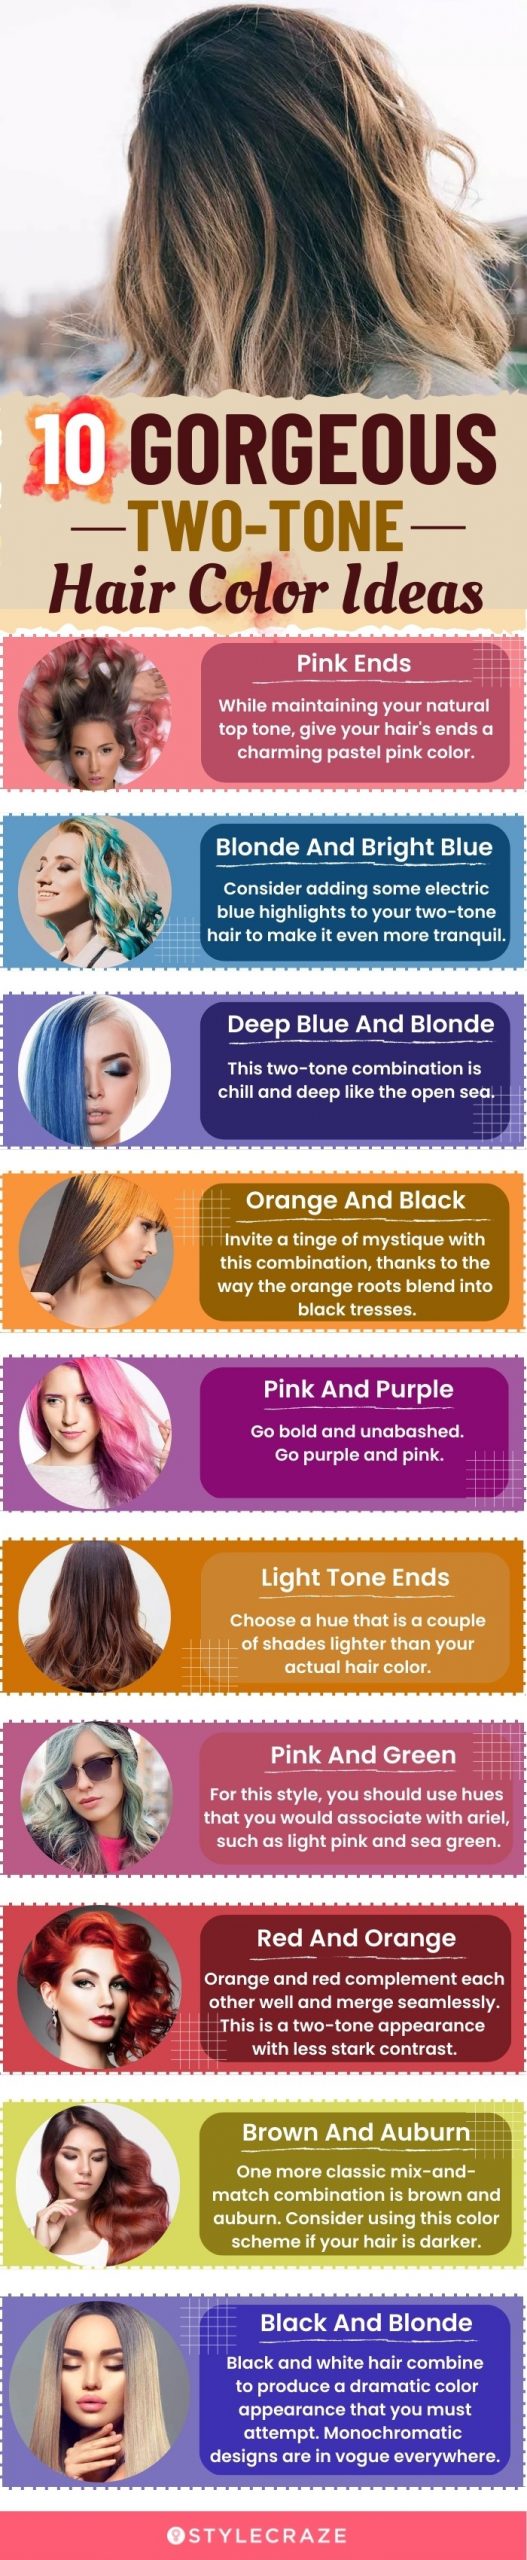 10 gorgeous two tone hair color (infographic)